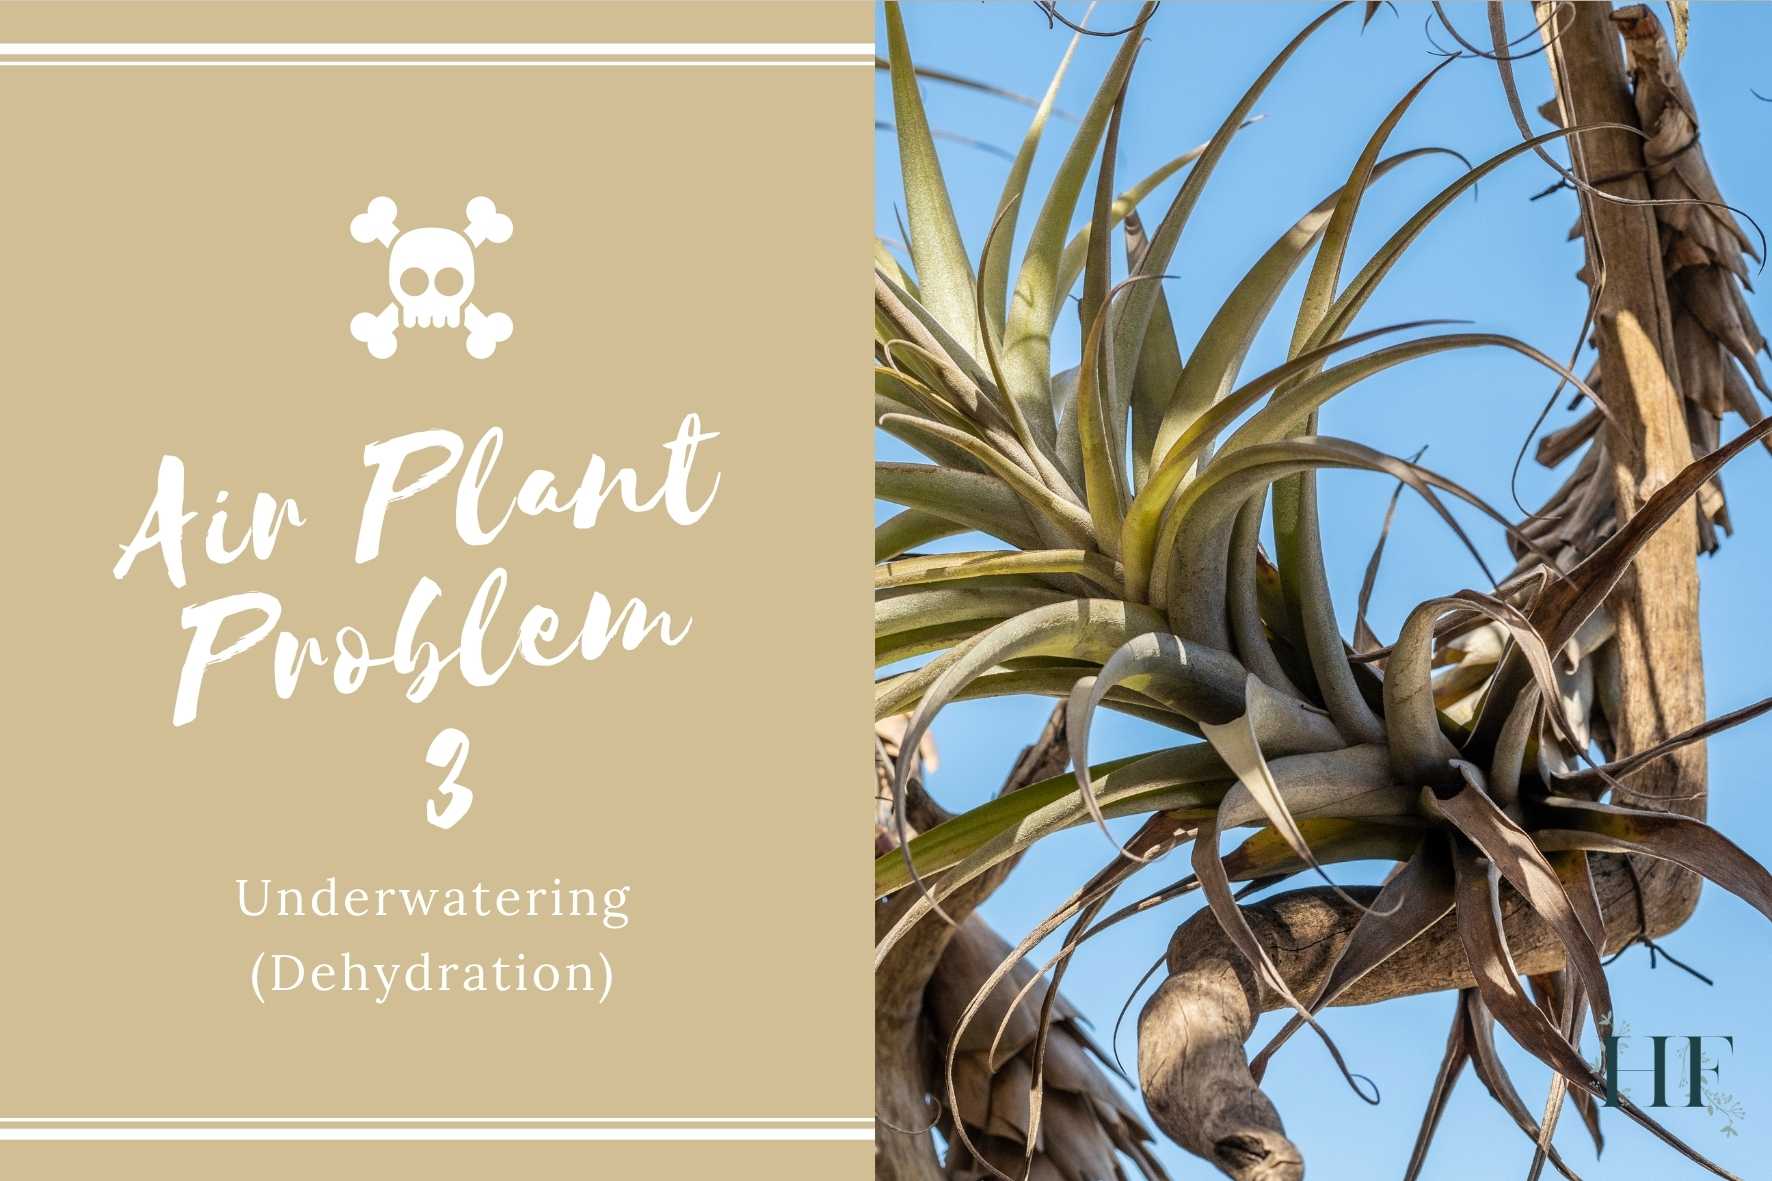 air-plant-problems-3-underwatering-dehydration